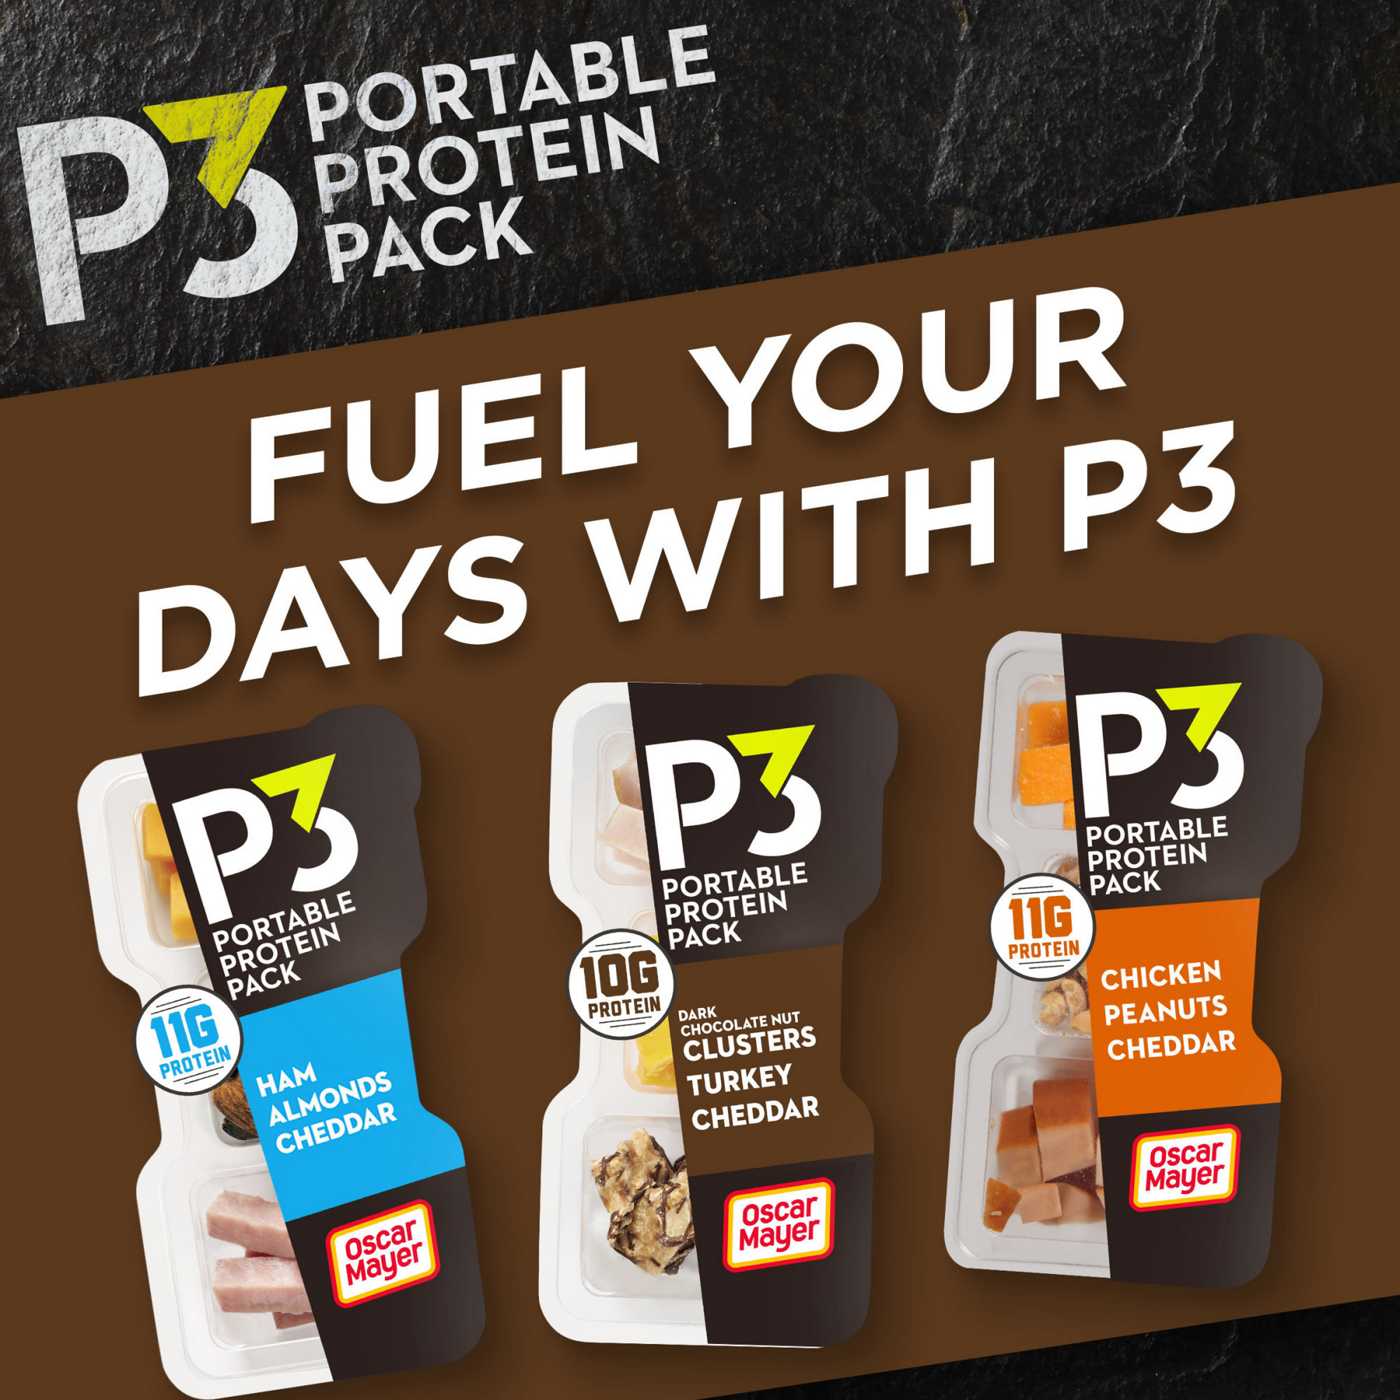 P3 Portable Protein Pack Snack Tray - Dark Chocolate Nut Clusters, Turkey & Cheddar; image 2 of 6